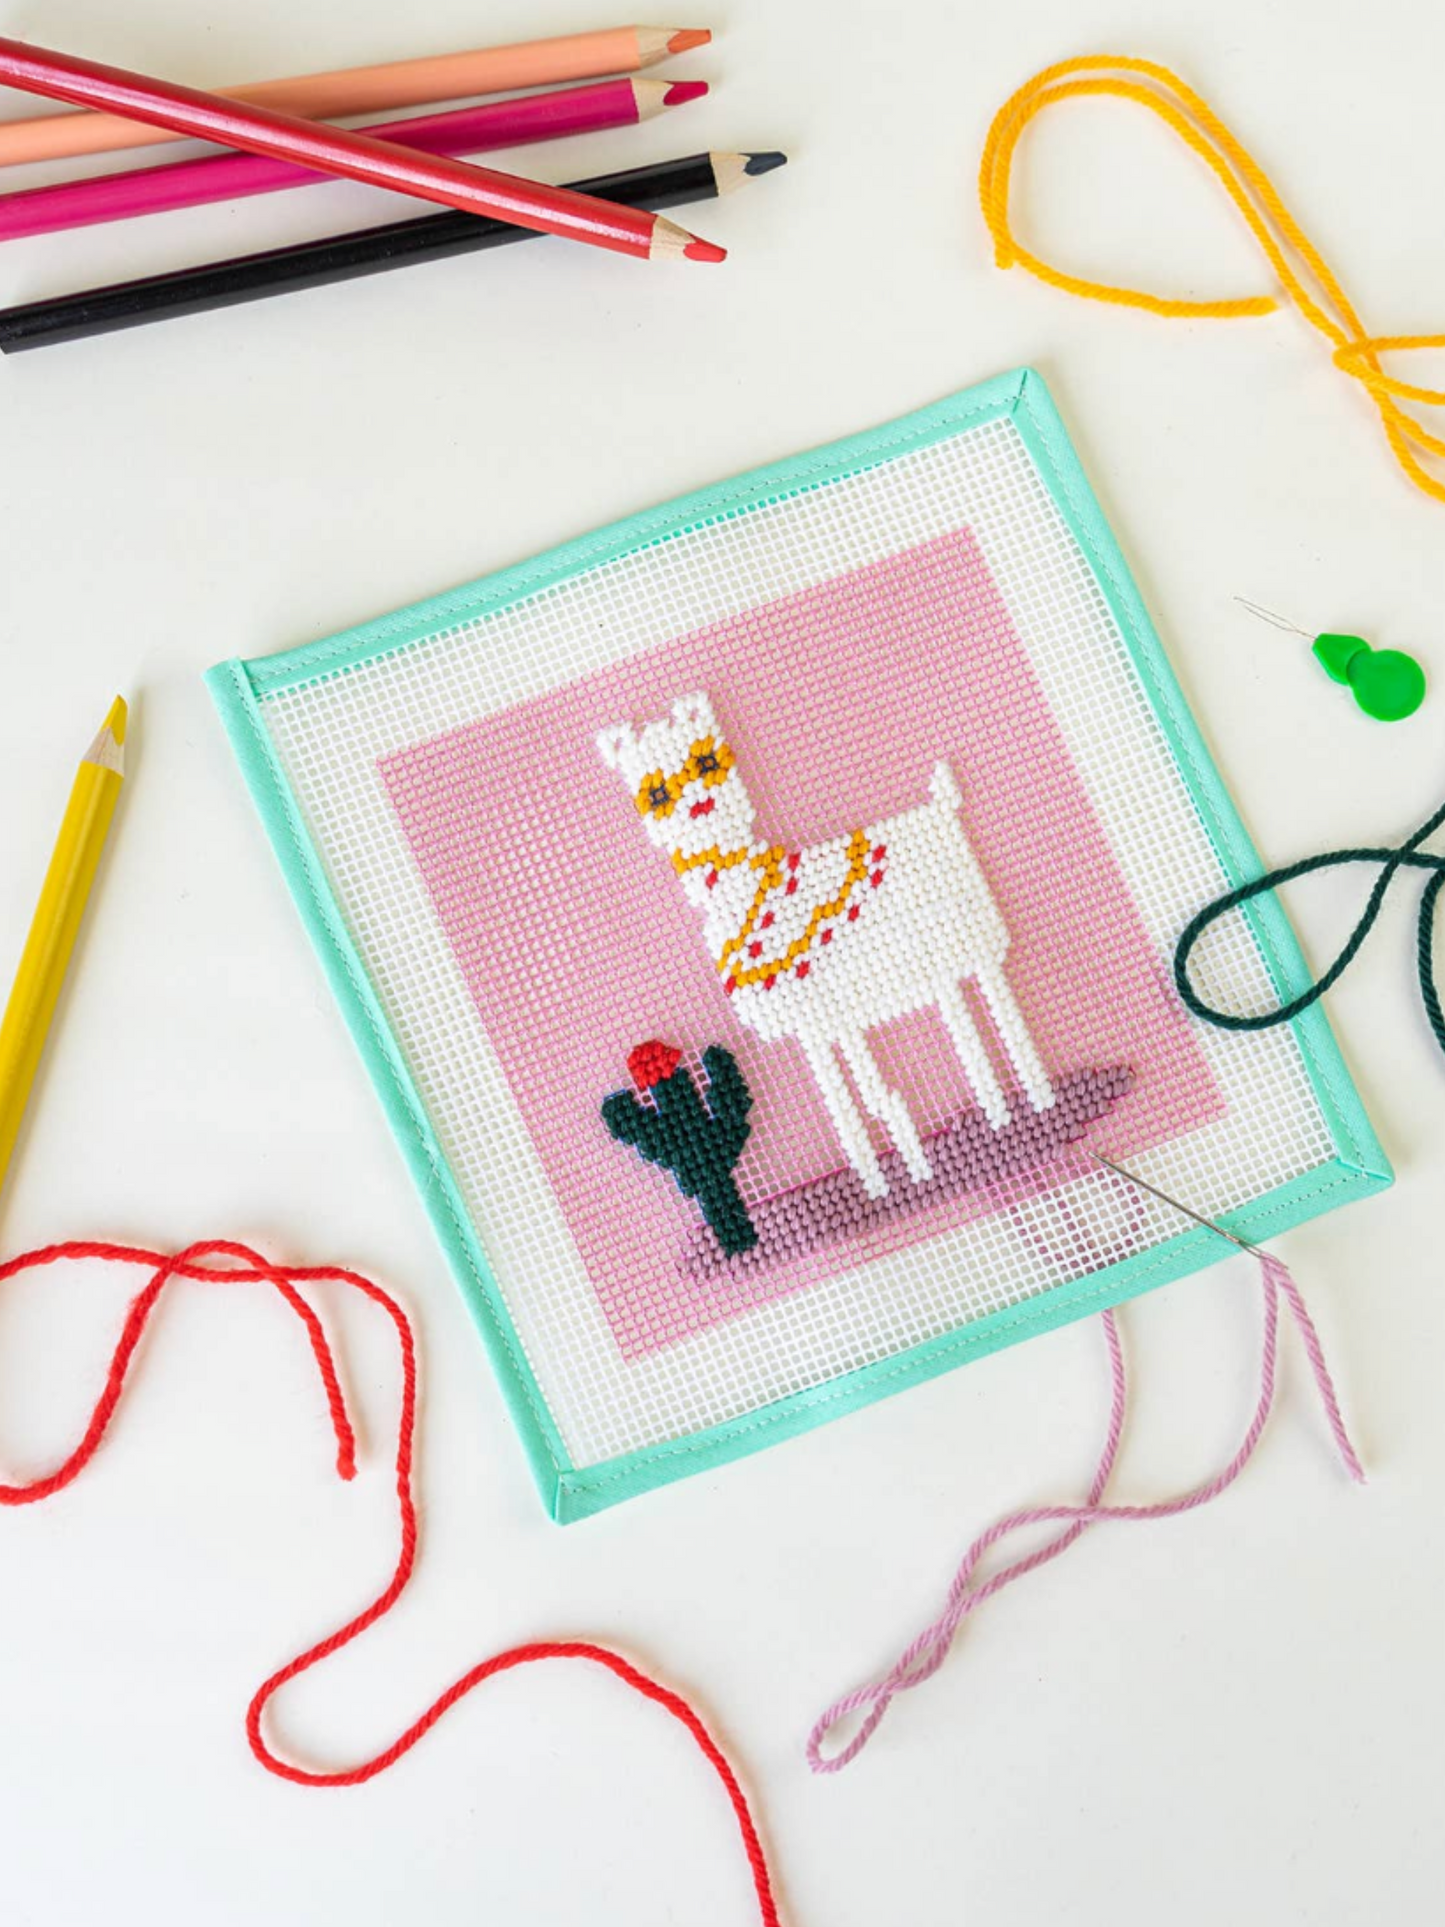 ** Needlepoint Class for Kids** Event on July 31st - TICKET